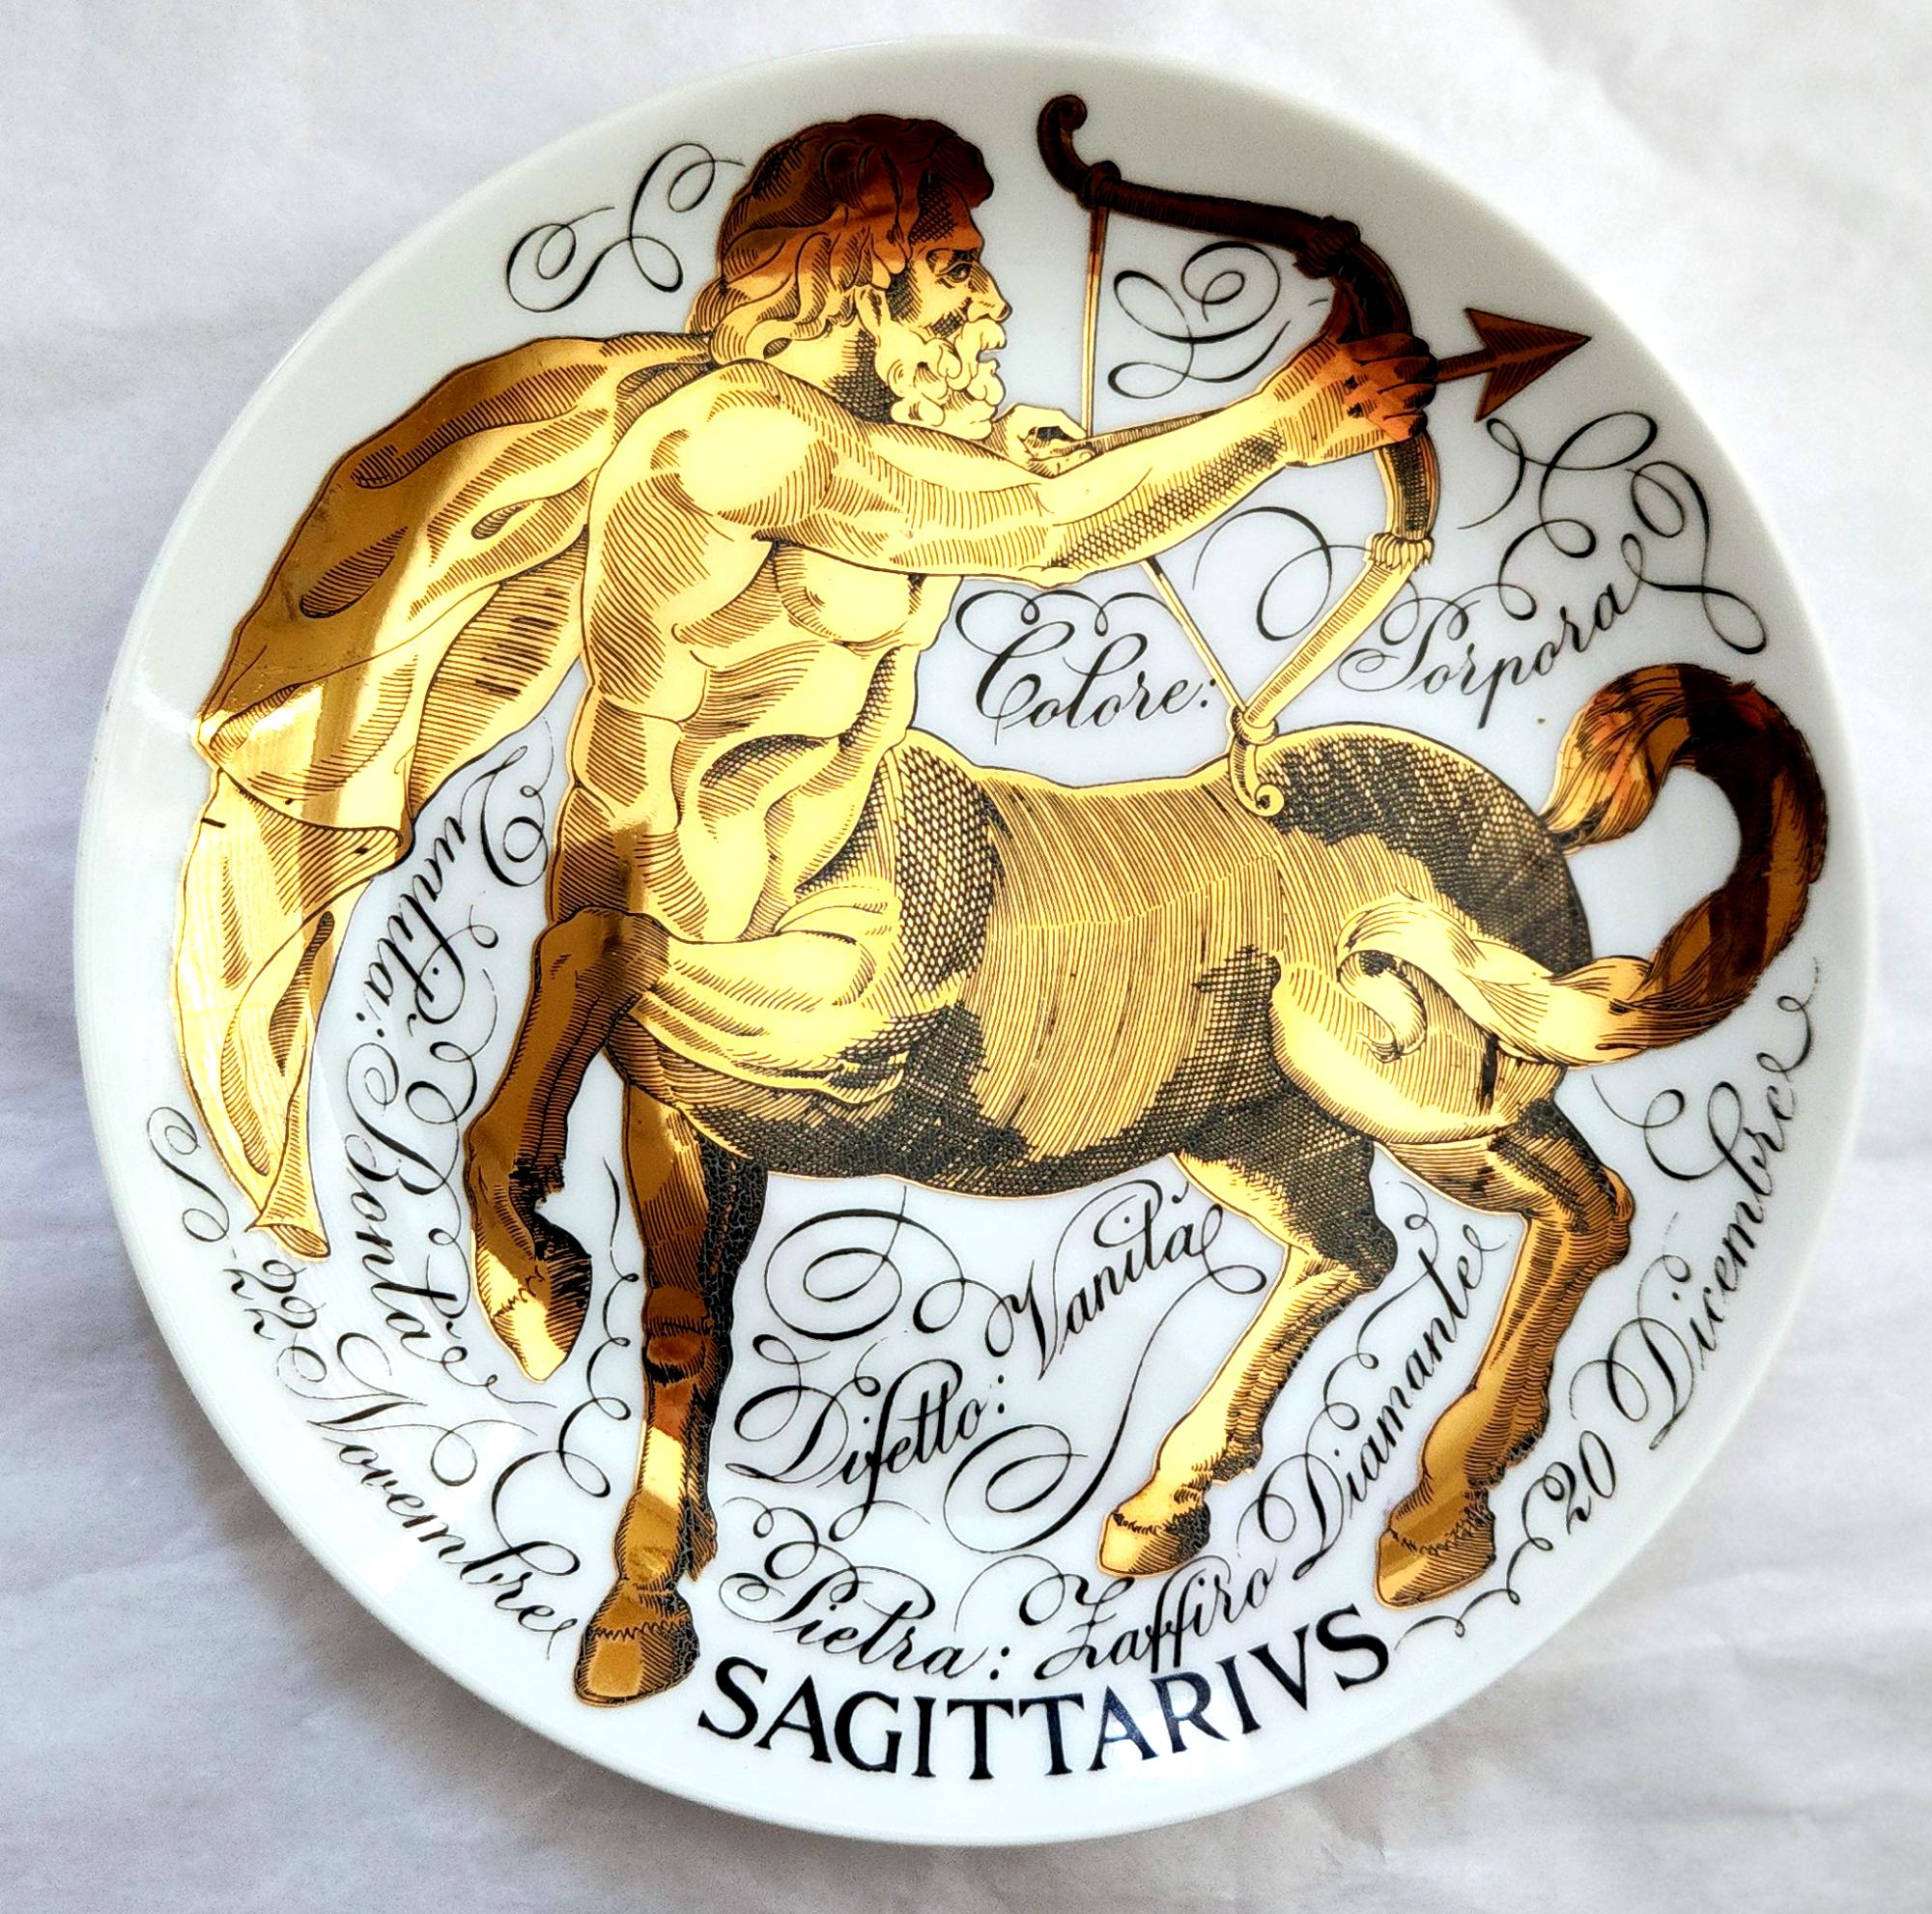 Vintage Piero Fornasetti Porcelain Zodiac Plate,
Sagittarius,
Astrali Pattern,
Made for Corisia,
Dated 1975, No 12.

The plate for the sign SAGITTARIUS is dated 1975 and is numbered #12.  The plate depicts the Astrological Zodiac sign Sagittarius